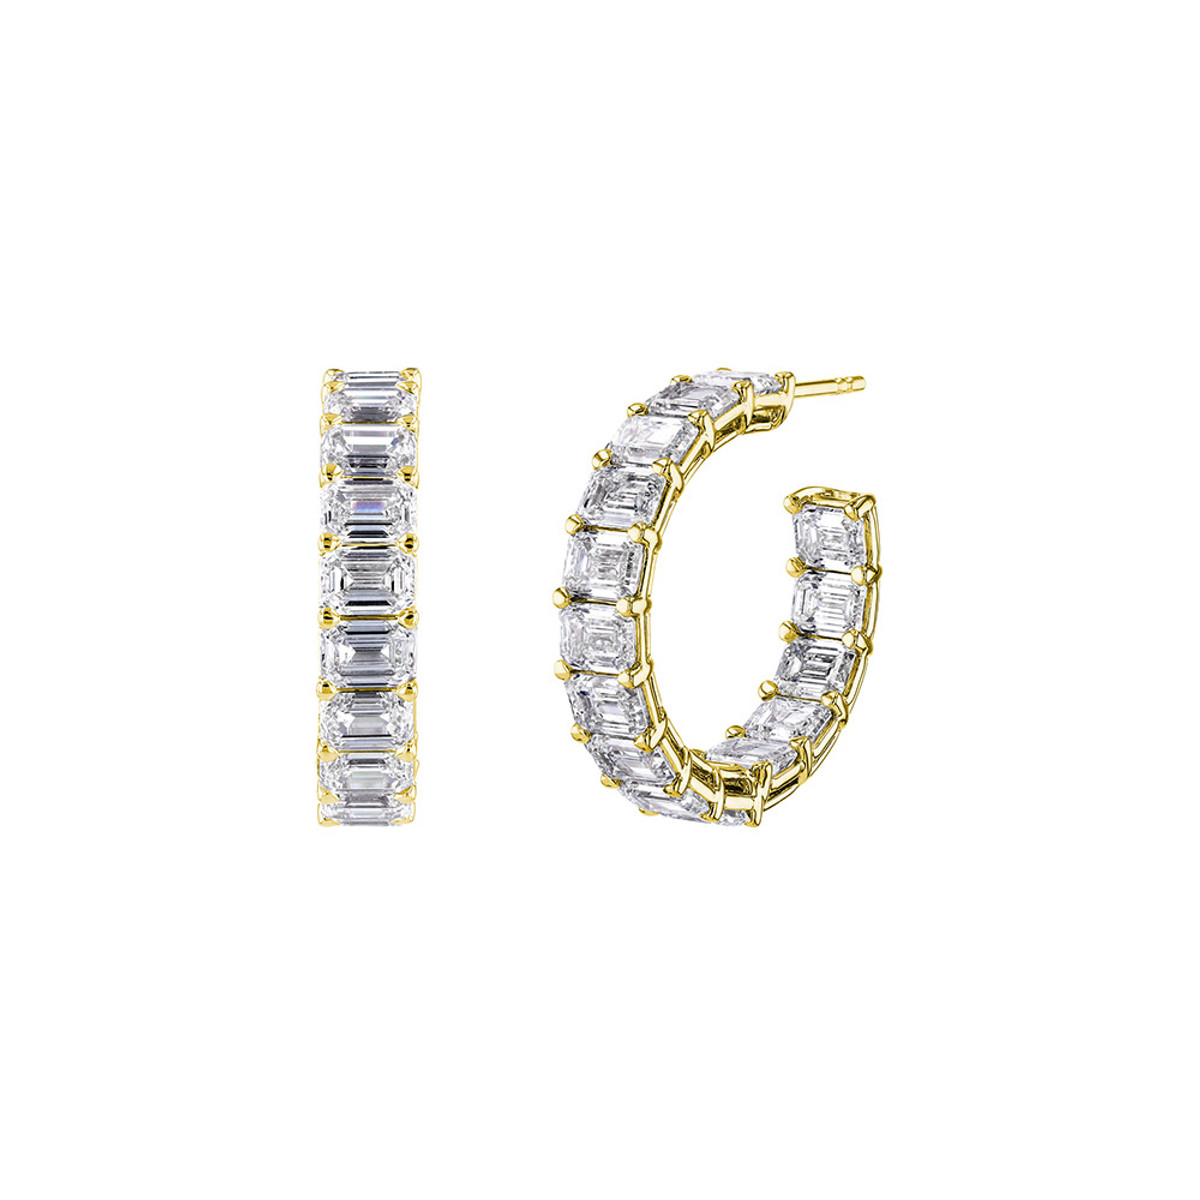 Hyde Park Collection 18K Yellow Gold Diamond Hoop Earrings-59194